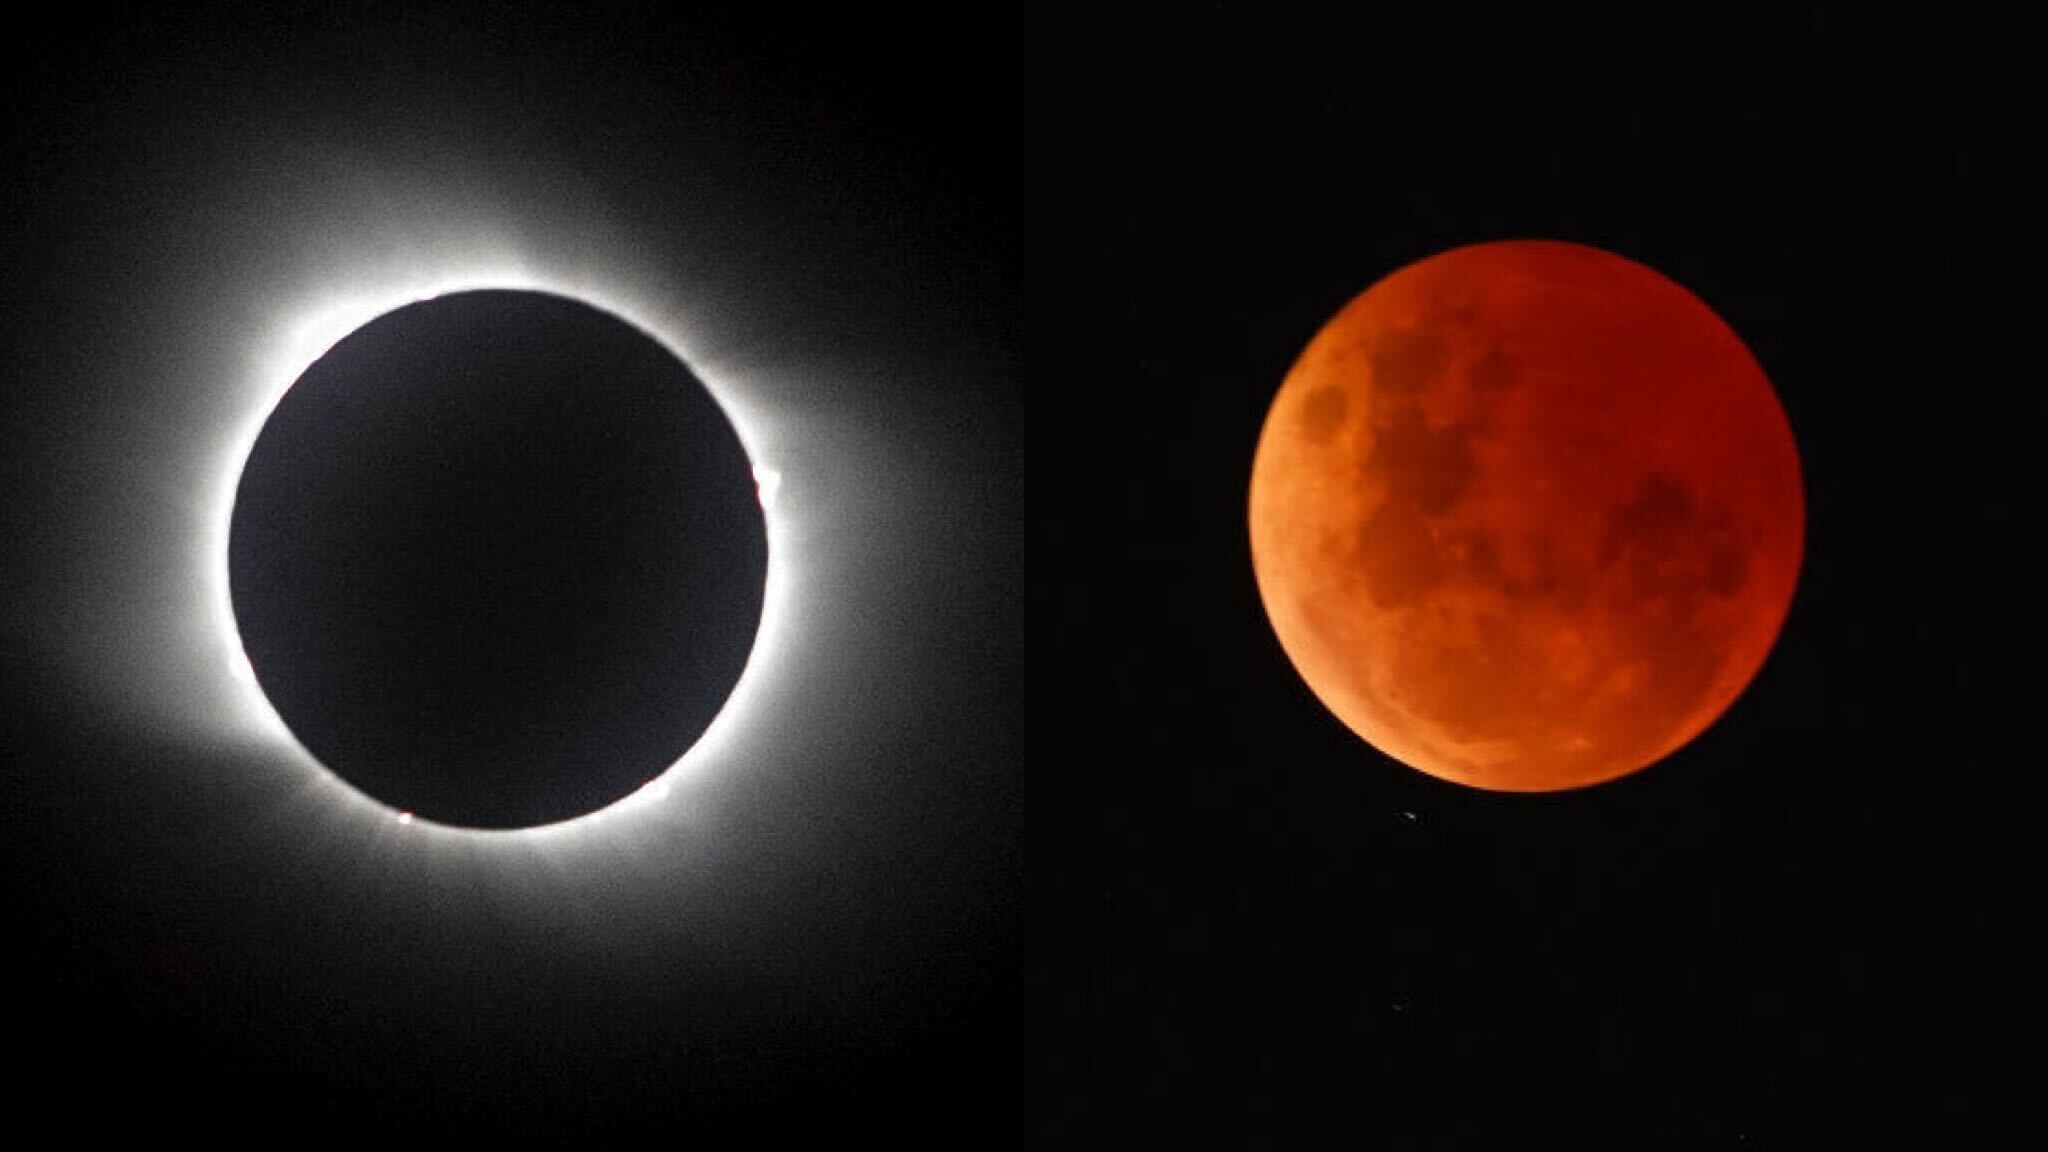 What is the difference between a solar and lunar eclipse?